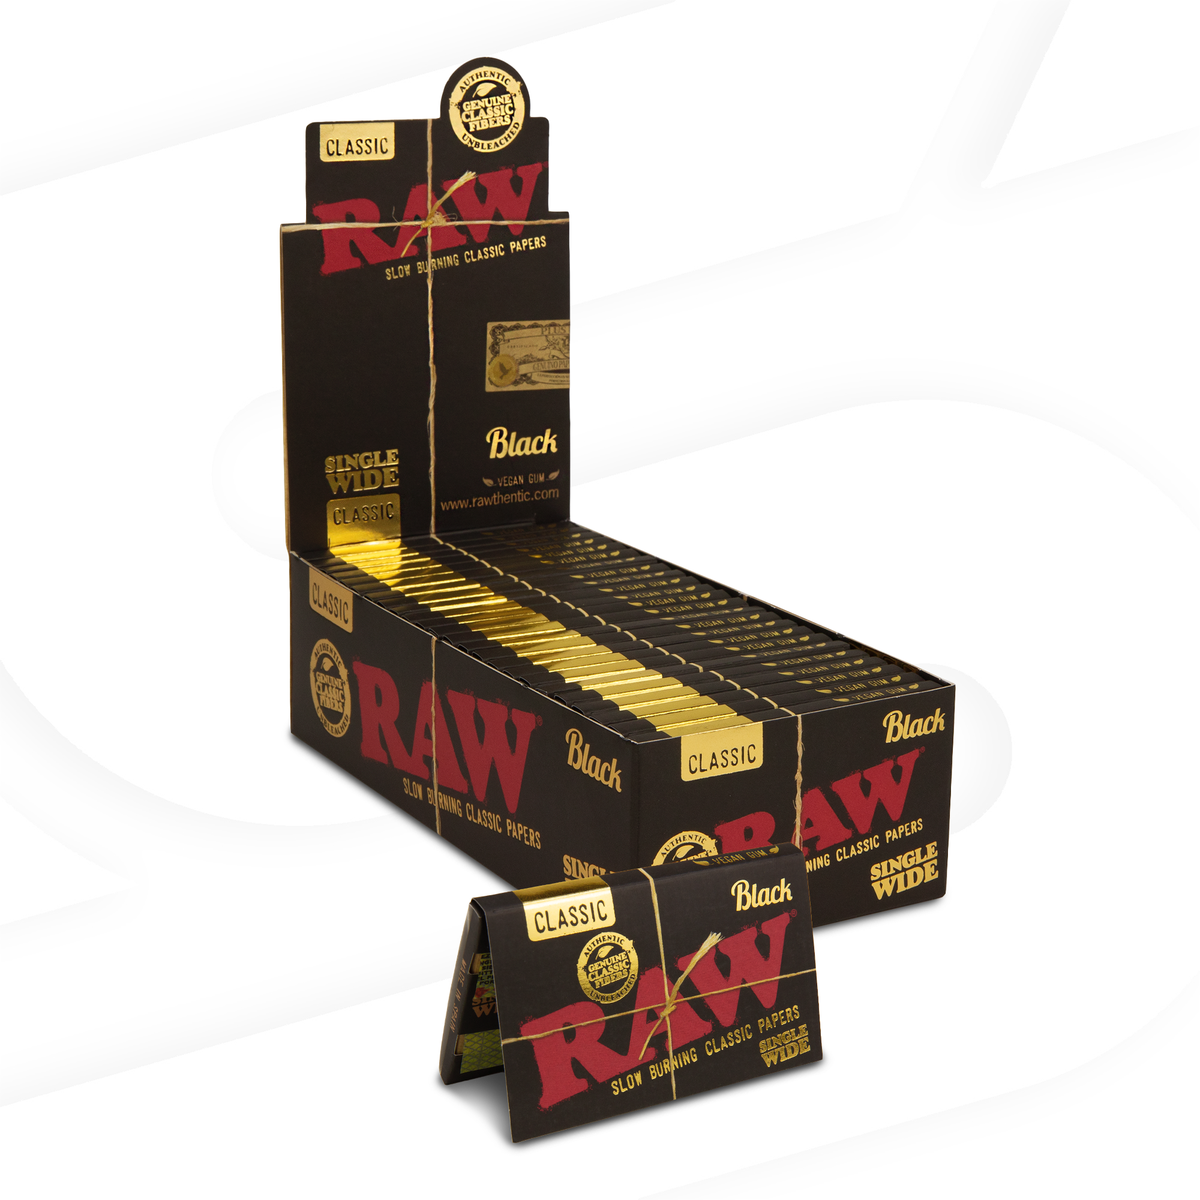 RAW Black Classic Single Wide Rolling Papers Rolling Papers RAWB-RPBK-SW01 esd-official